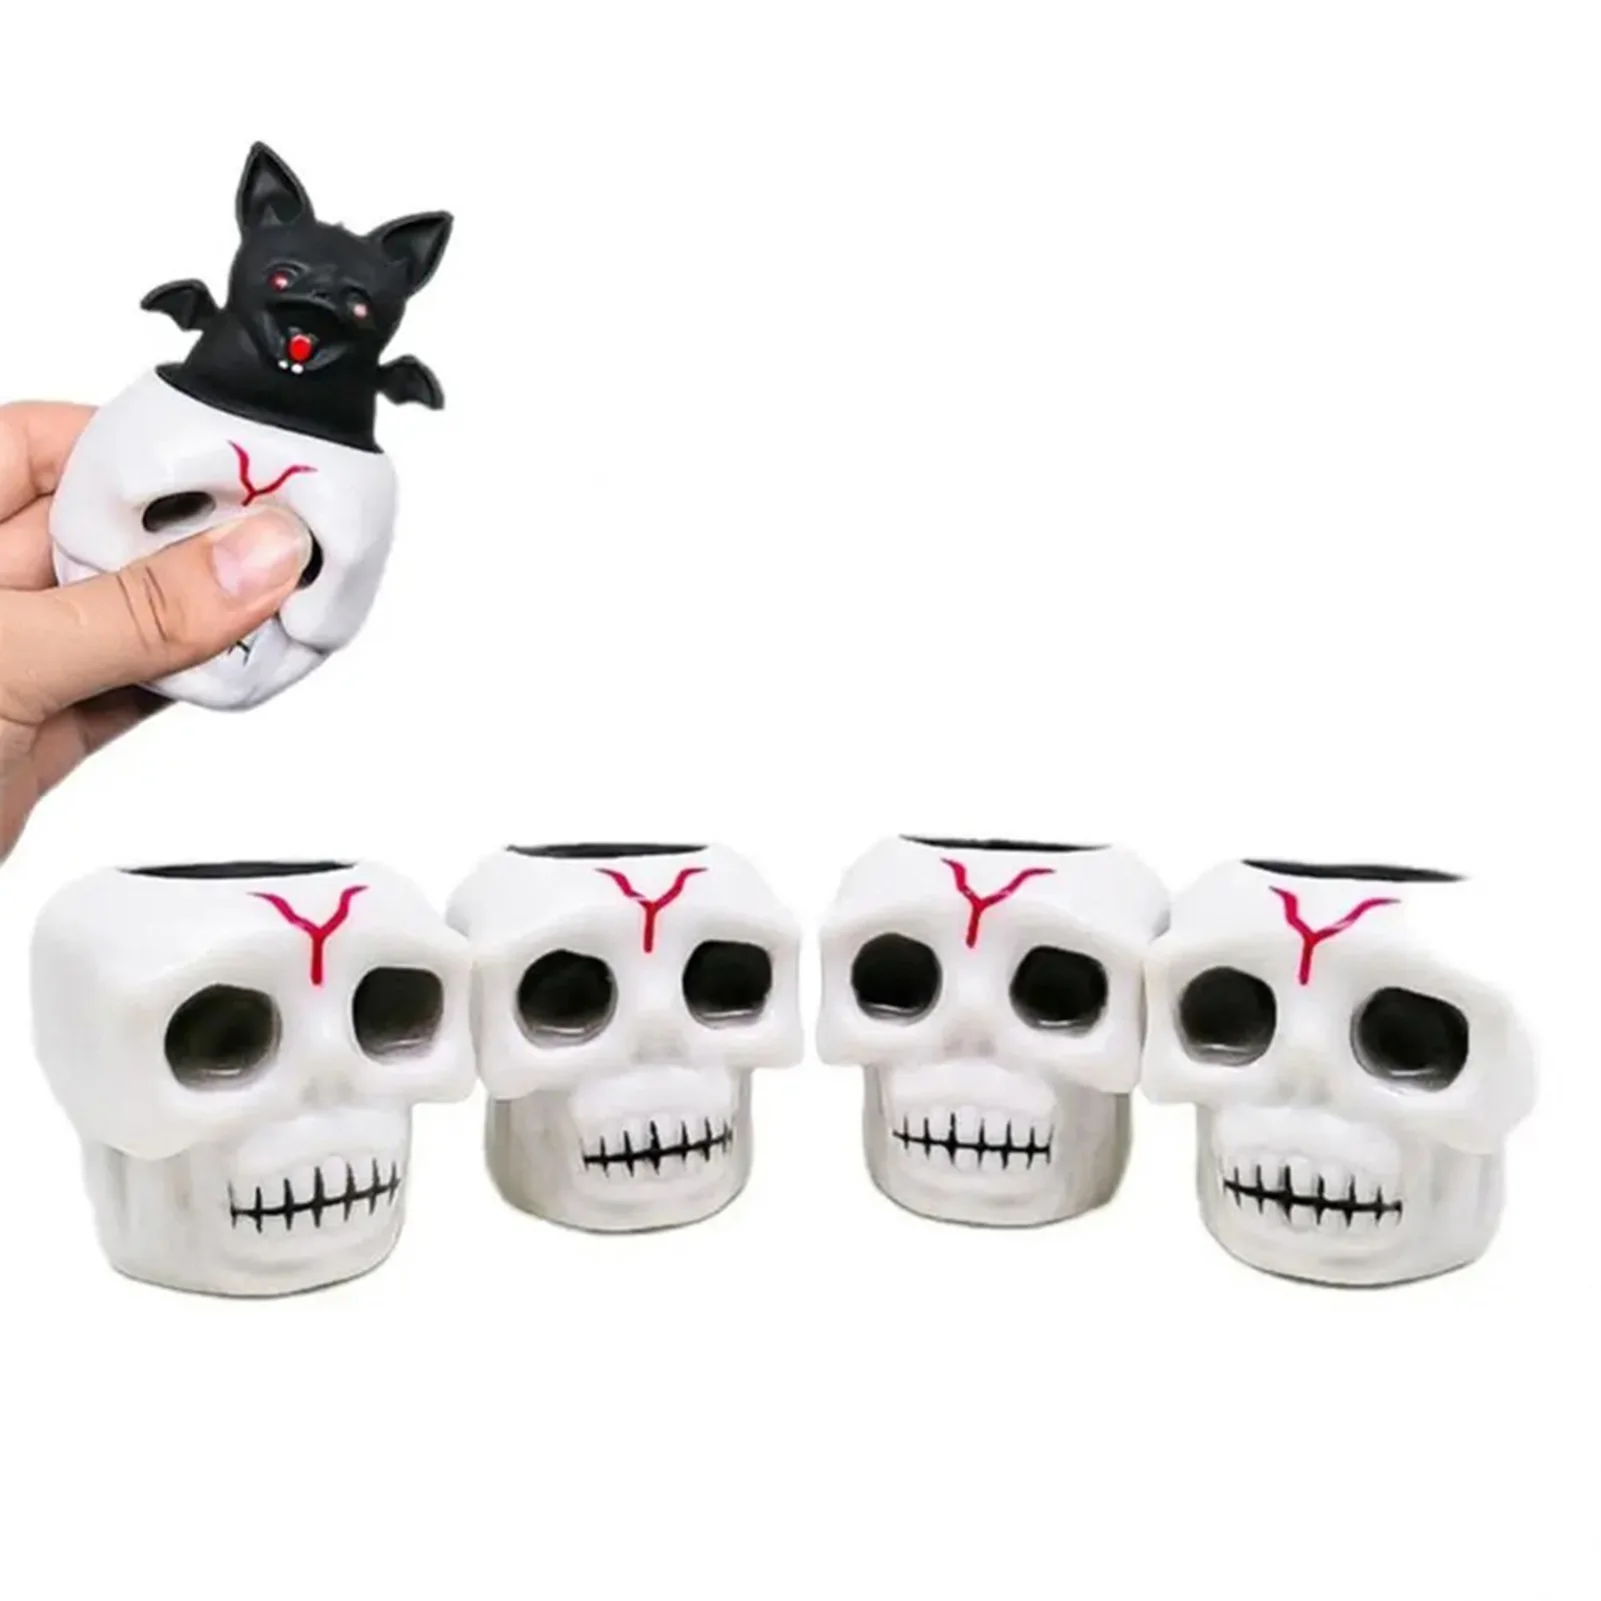 

TPR Skull Bat Squeeze Toy Portable Tear-resistance Vent Toy Children Gift